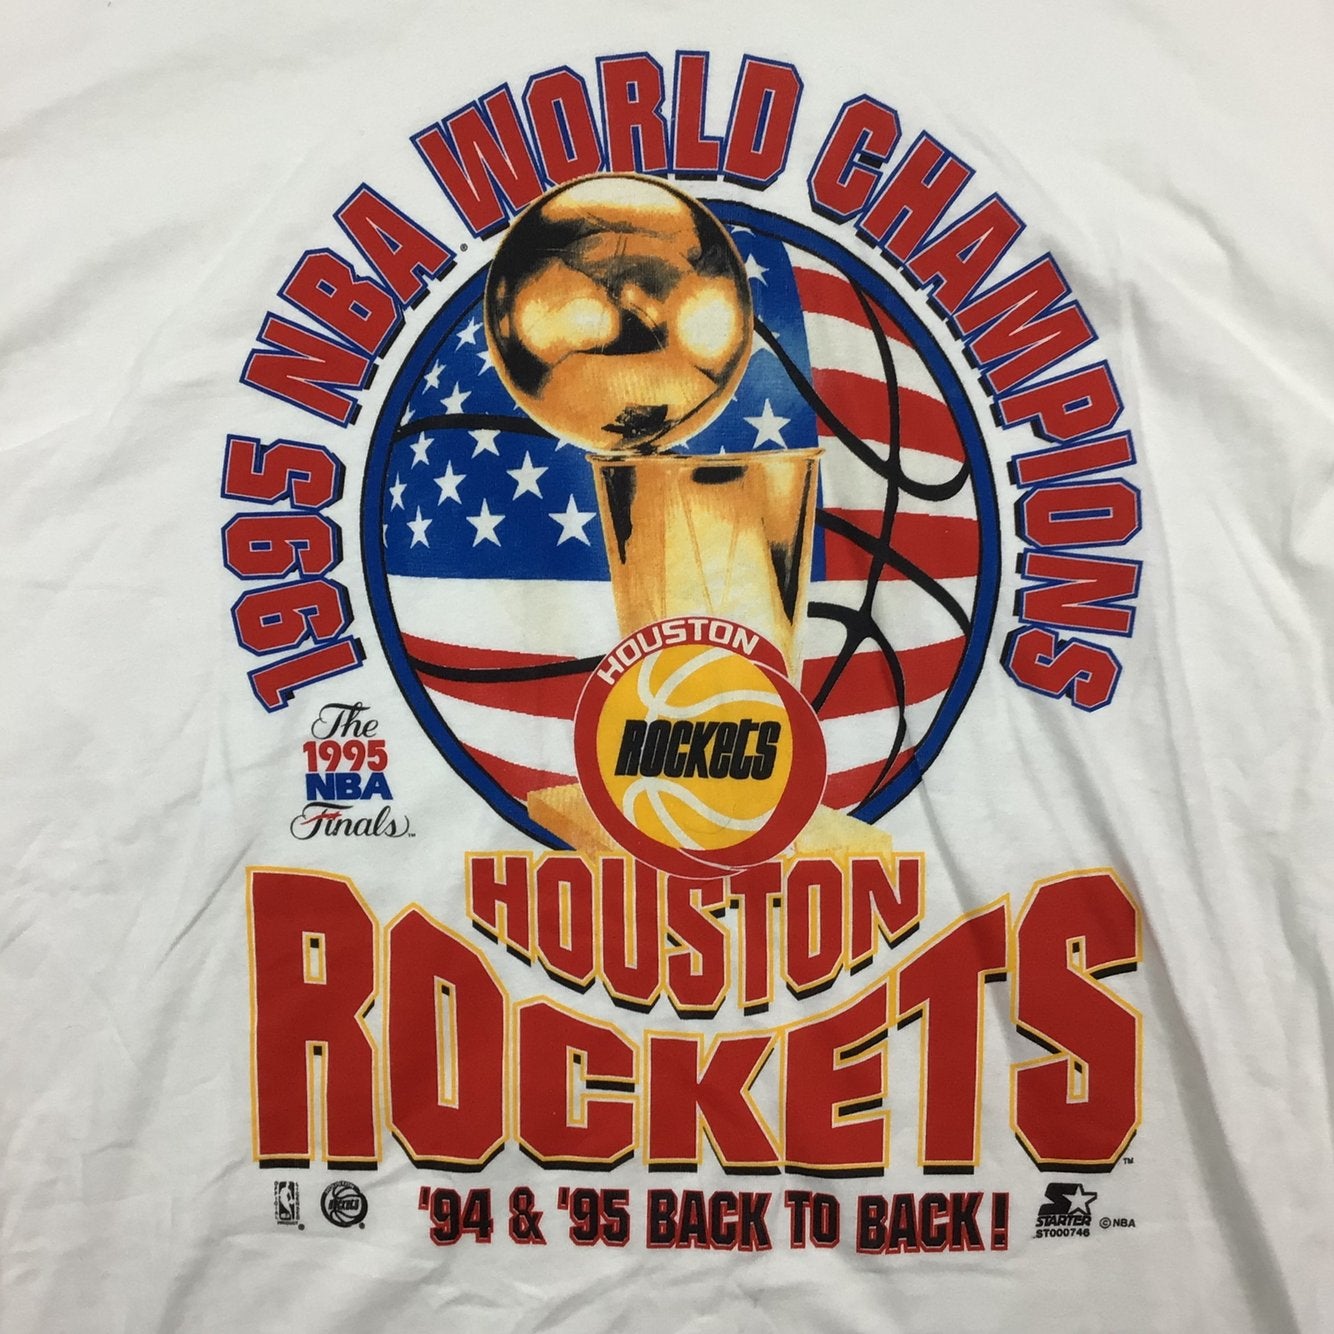 Rockets 1995 Forged in Gold Championship Tee (Black) – Vintage